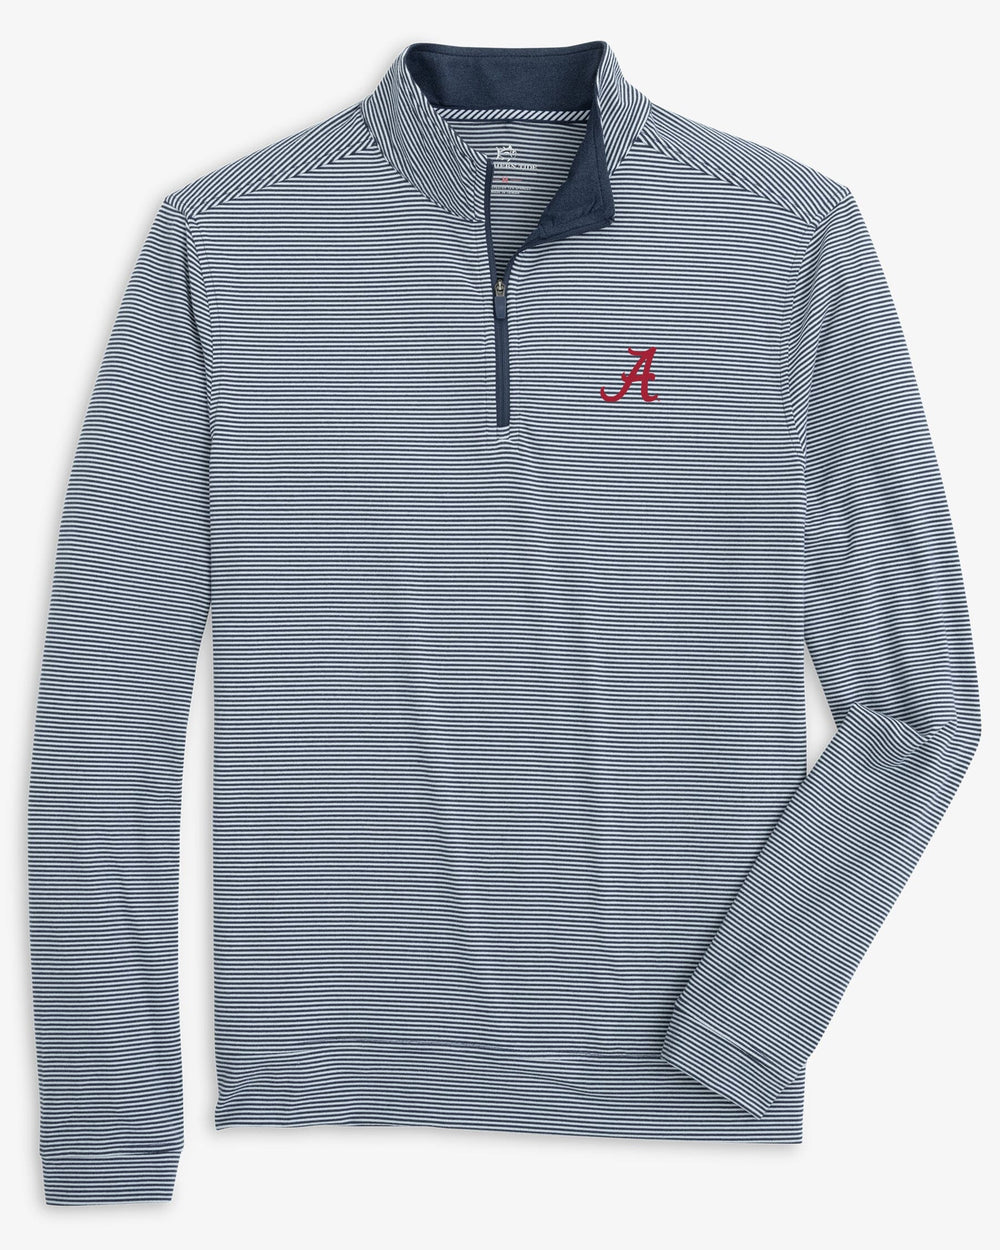 The front view of the Alabama Crimson Tide Cruiser Micro-Stripe Heather Quarter Zip by Southern Tide - Heather Navy